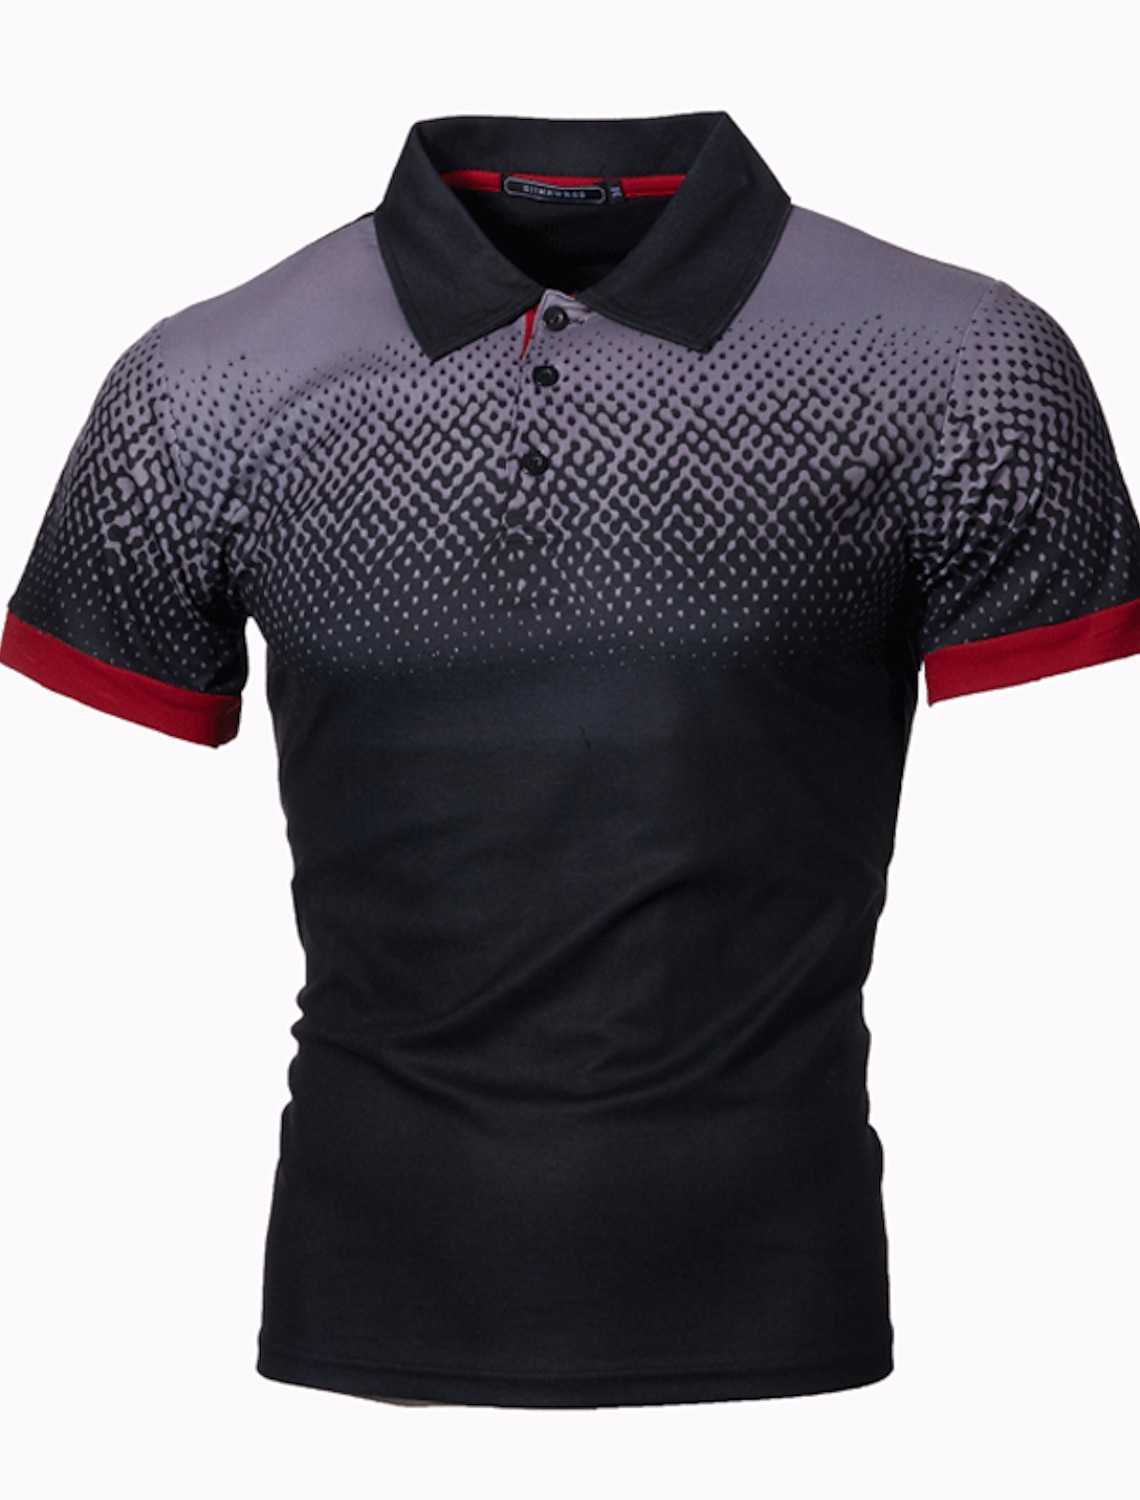 Men's Polo Shirts Golf Shirt Button Up Breathable Quick Dry Moisture Wicking Short Sleeves Mans Clothes Summer Tennis Sportswear HKD230825